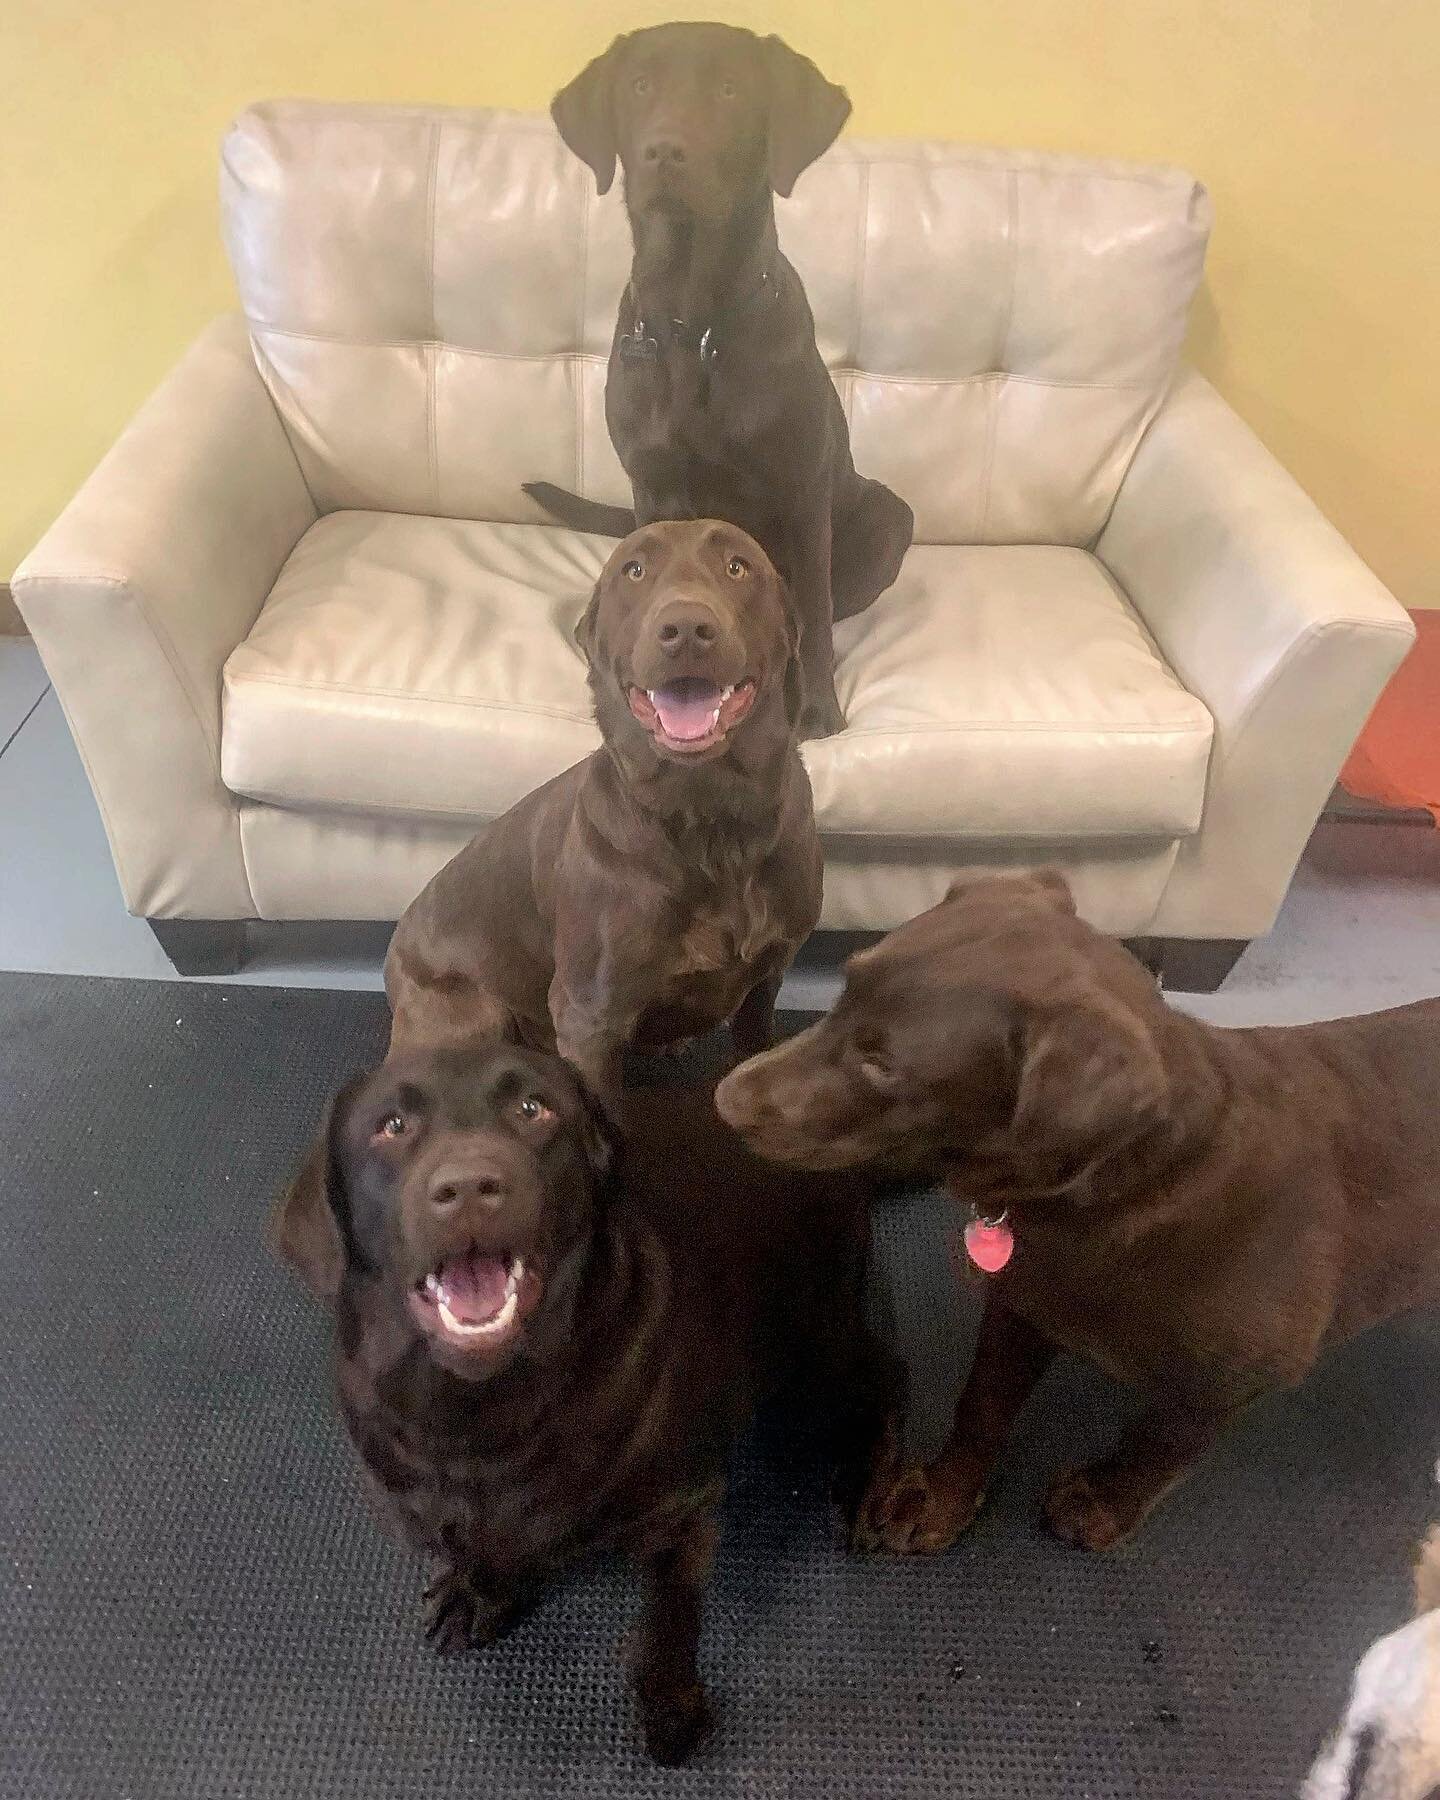 Like a chocolate in a box, looking well behaved and in place, all the while harboring a secret center! #peacelovepetcare #chocalate #steamboatdigsdogs #steamboatdogs #chocalatelabs